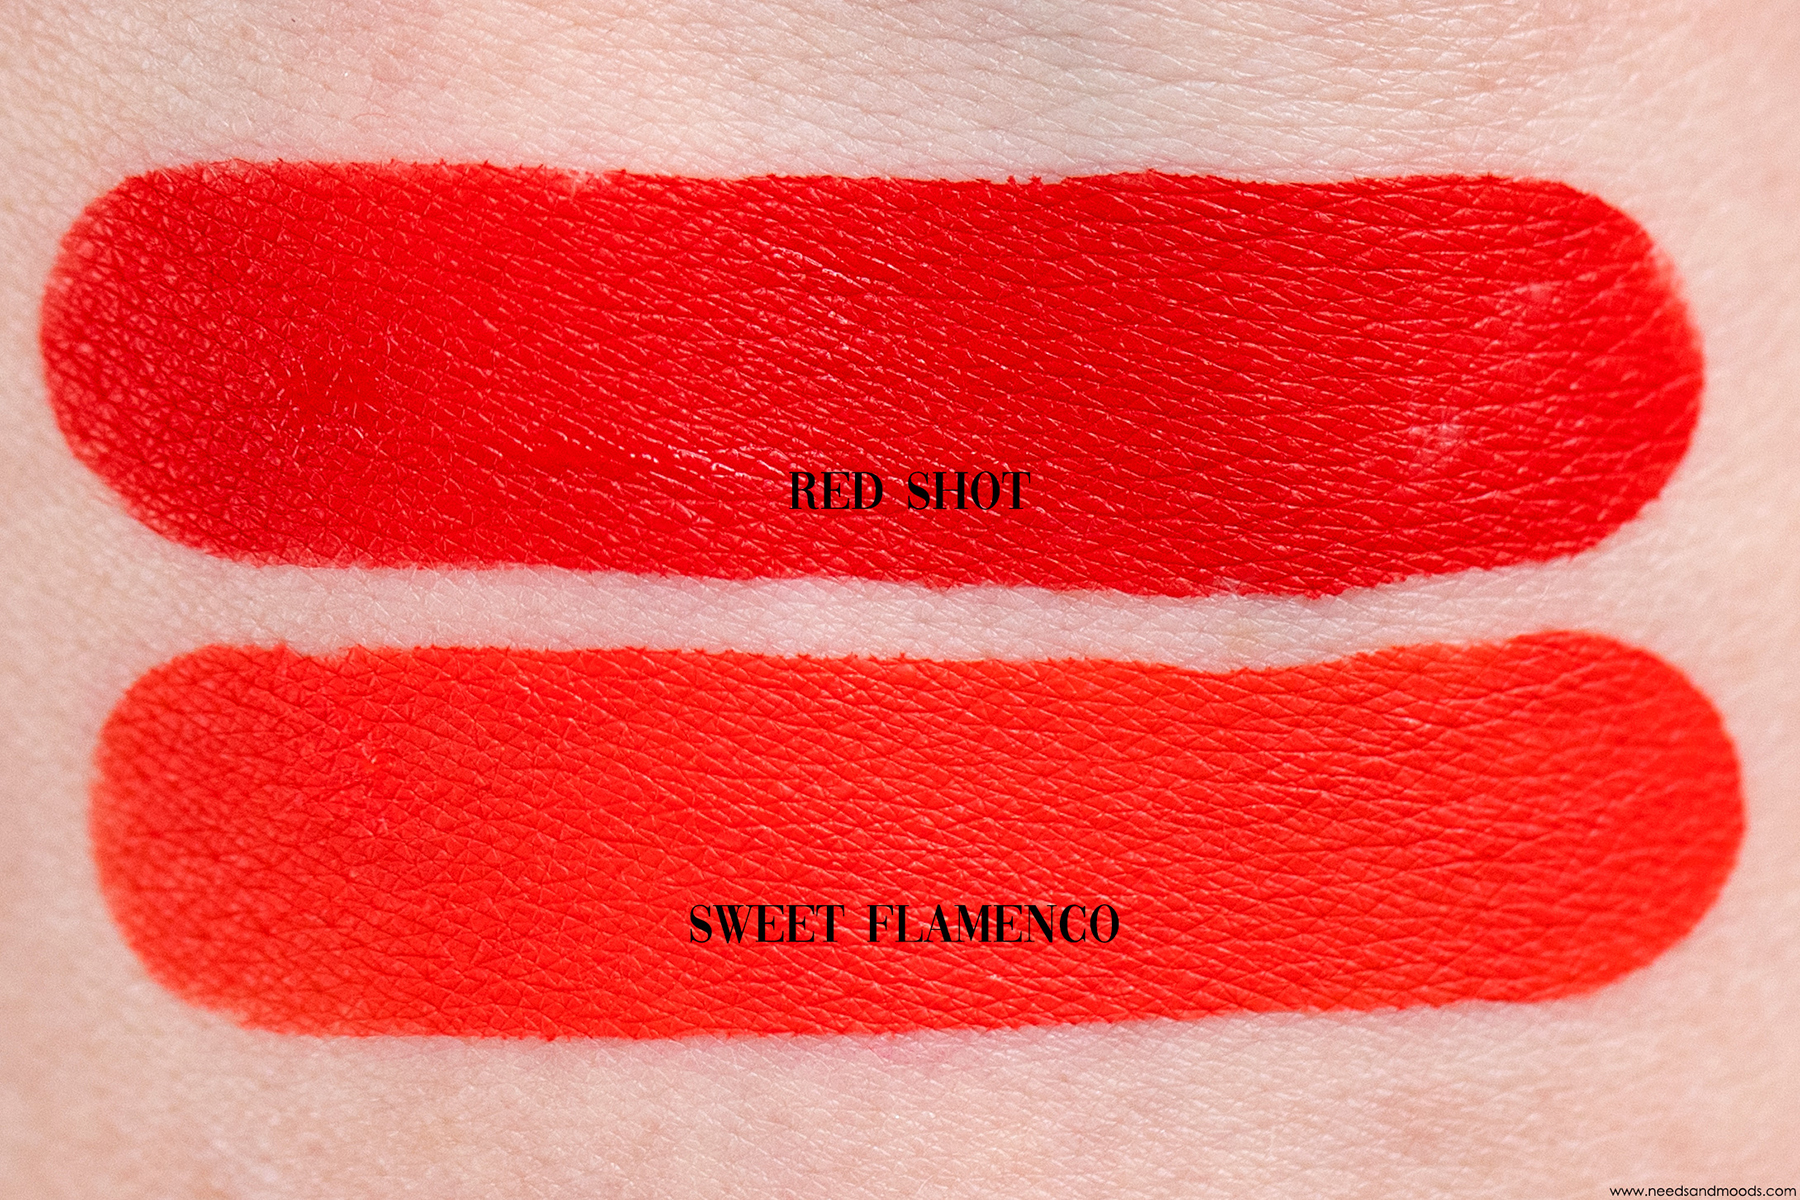 by-terry-lip-expert-swatch-sweet-flamenco-red-shot